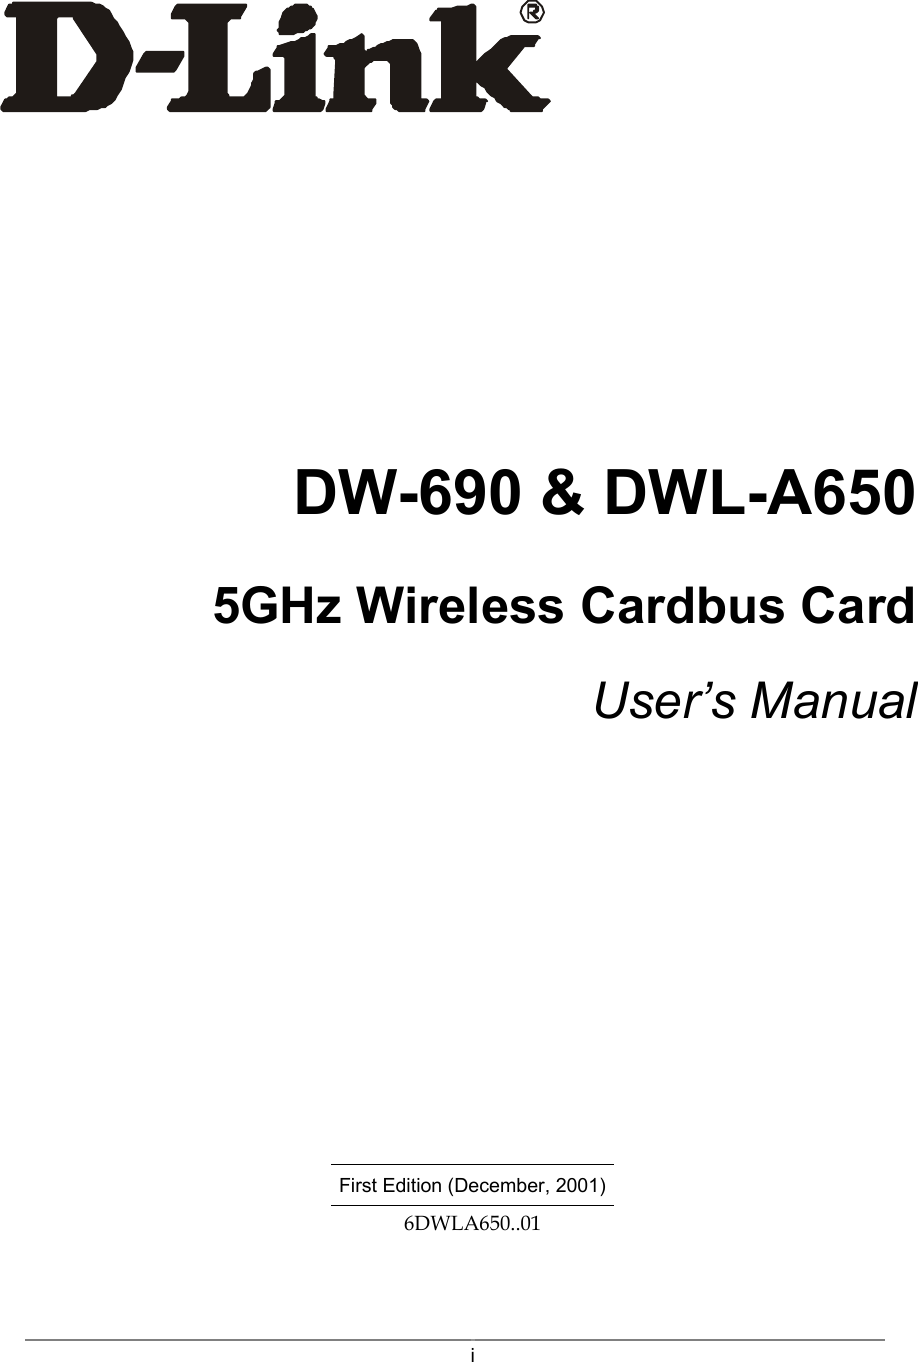  i   DW-690 &amp; DWL-A650 5GHz Wireless Cardbus Card User’s Manual         First Edition (December, 2001) 6DWLA650..01  